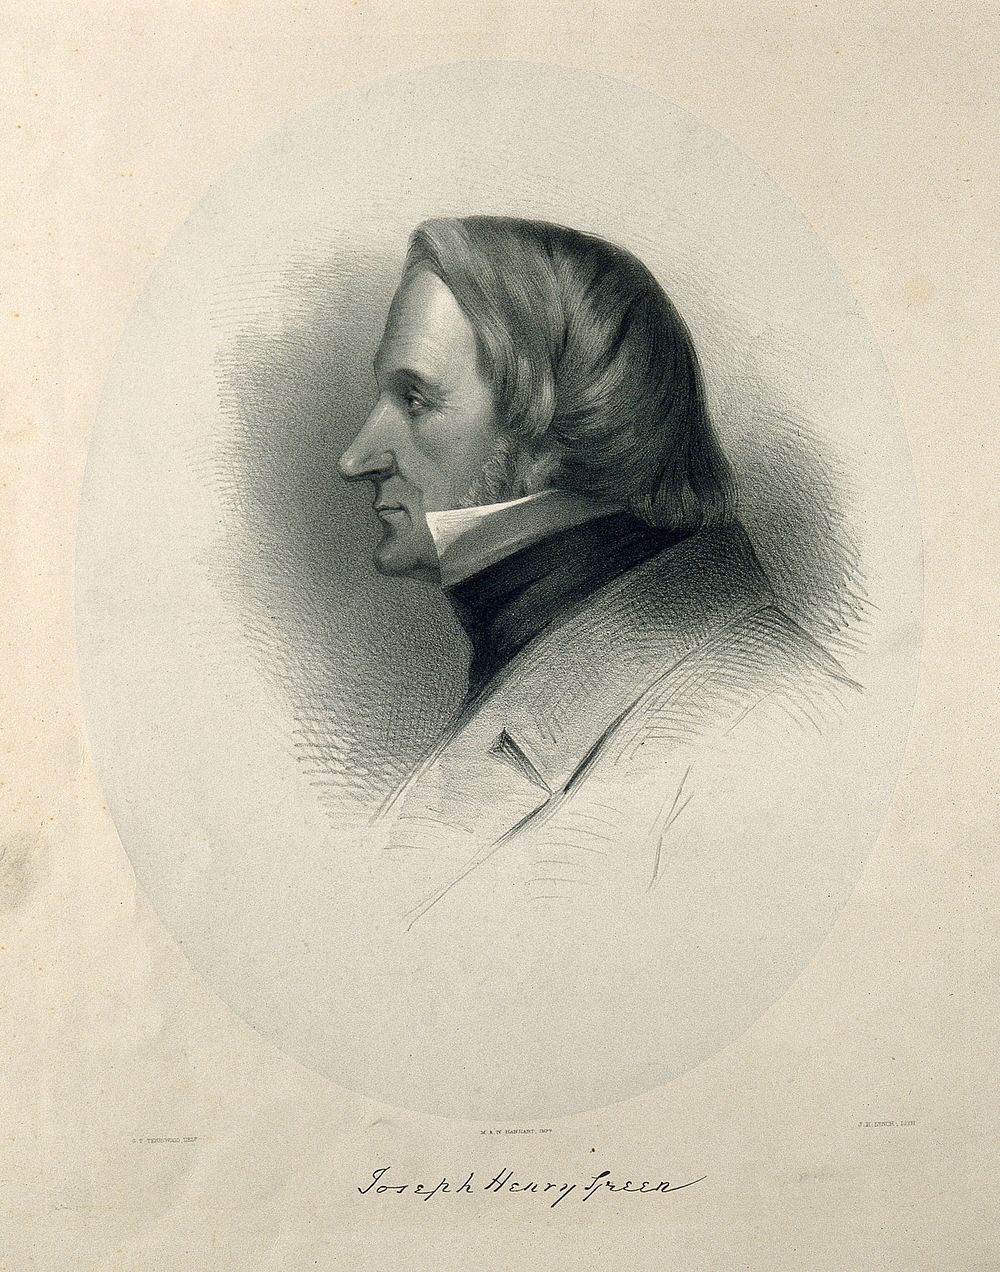 Joseph Henry Green. Lithograph by J. H. Lynch after G. T. Teniswood.